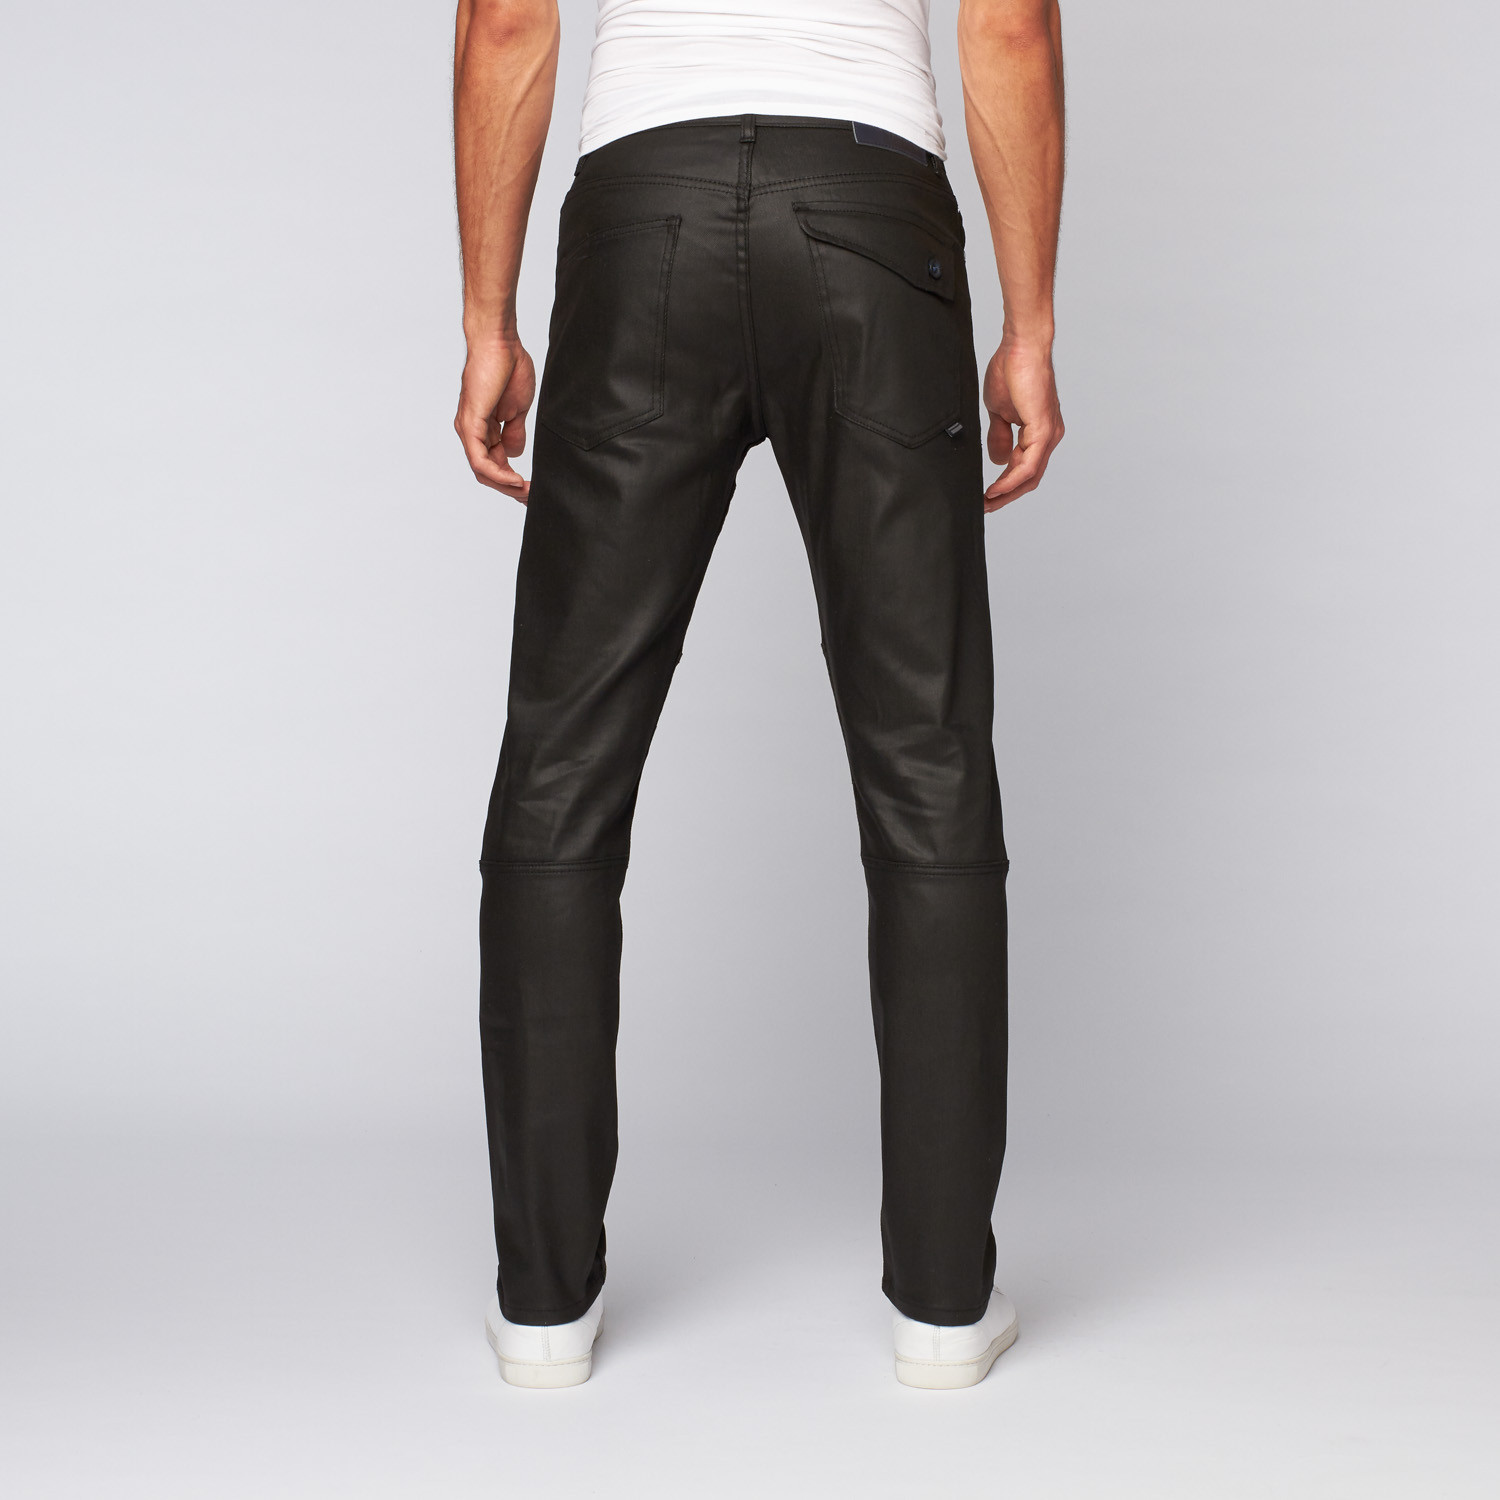 Dean Deluxe Wax Coated Skinny Jean // Black (33WX32L) - The New ...